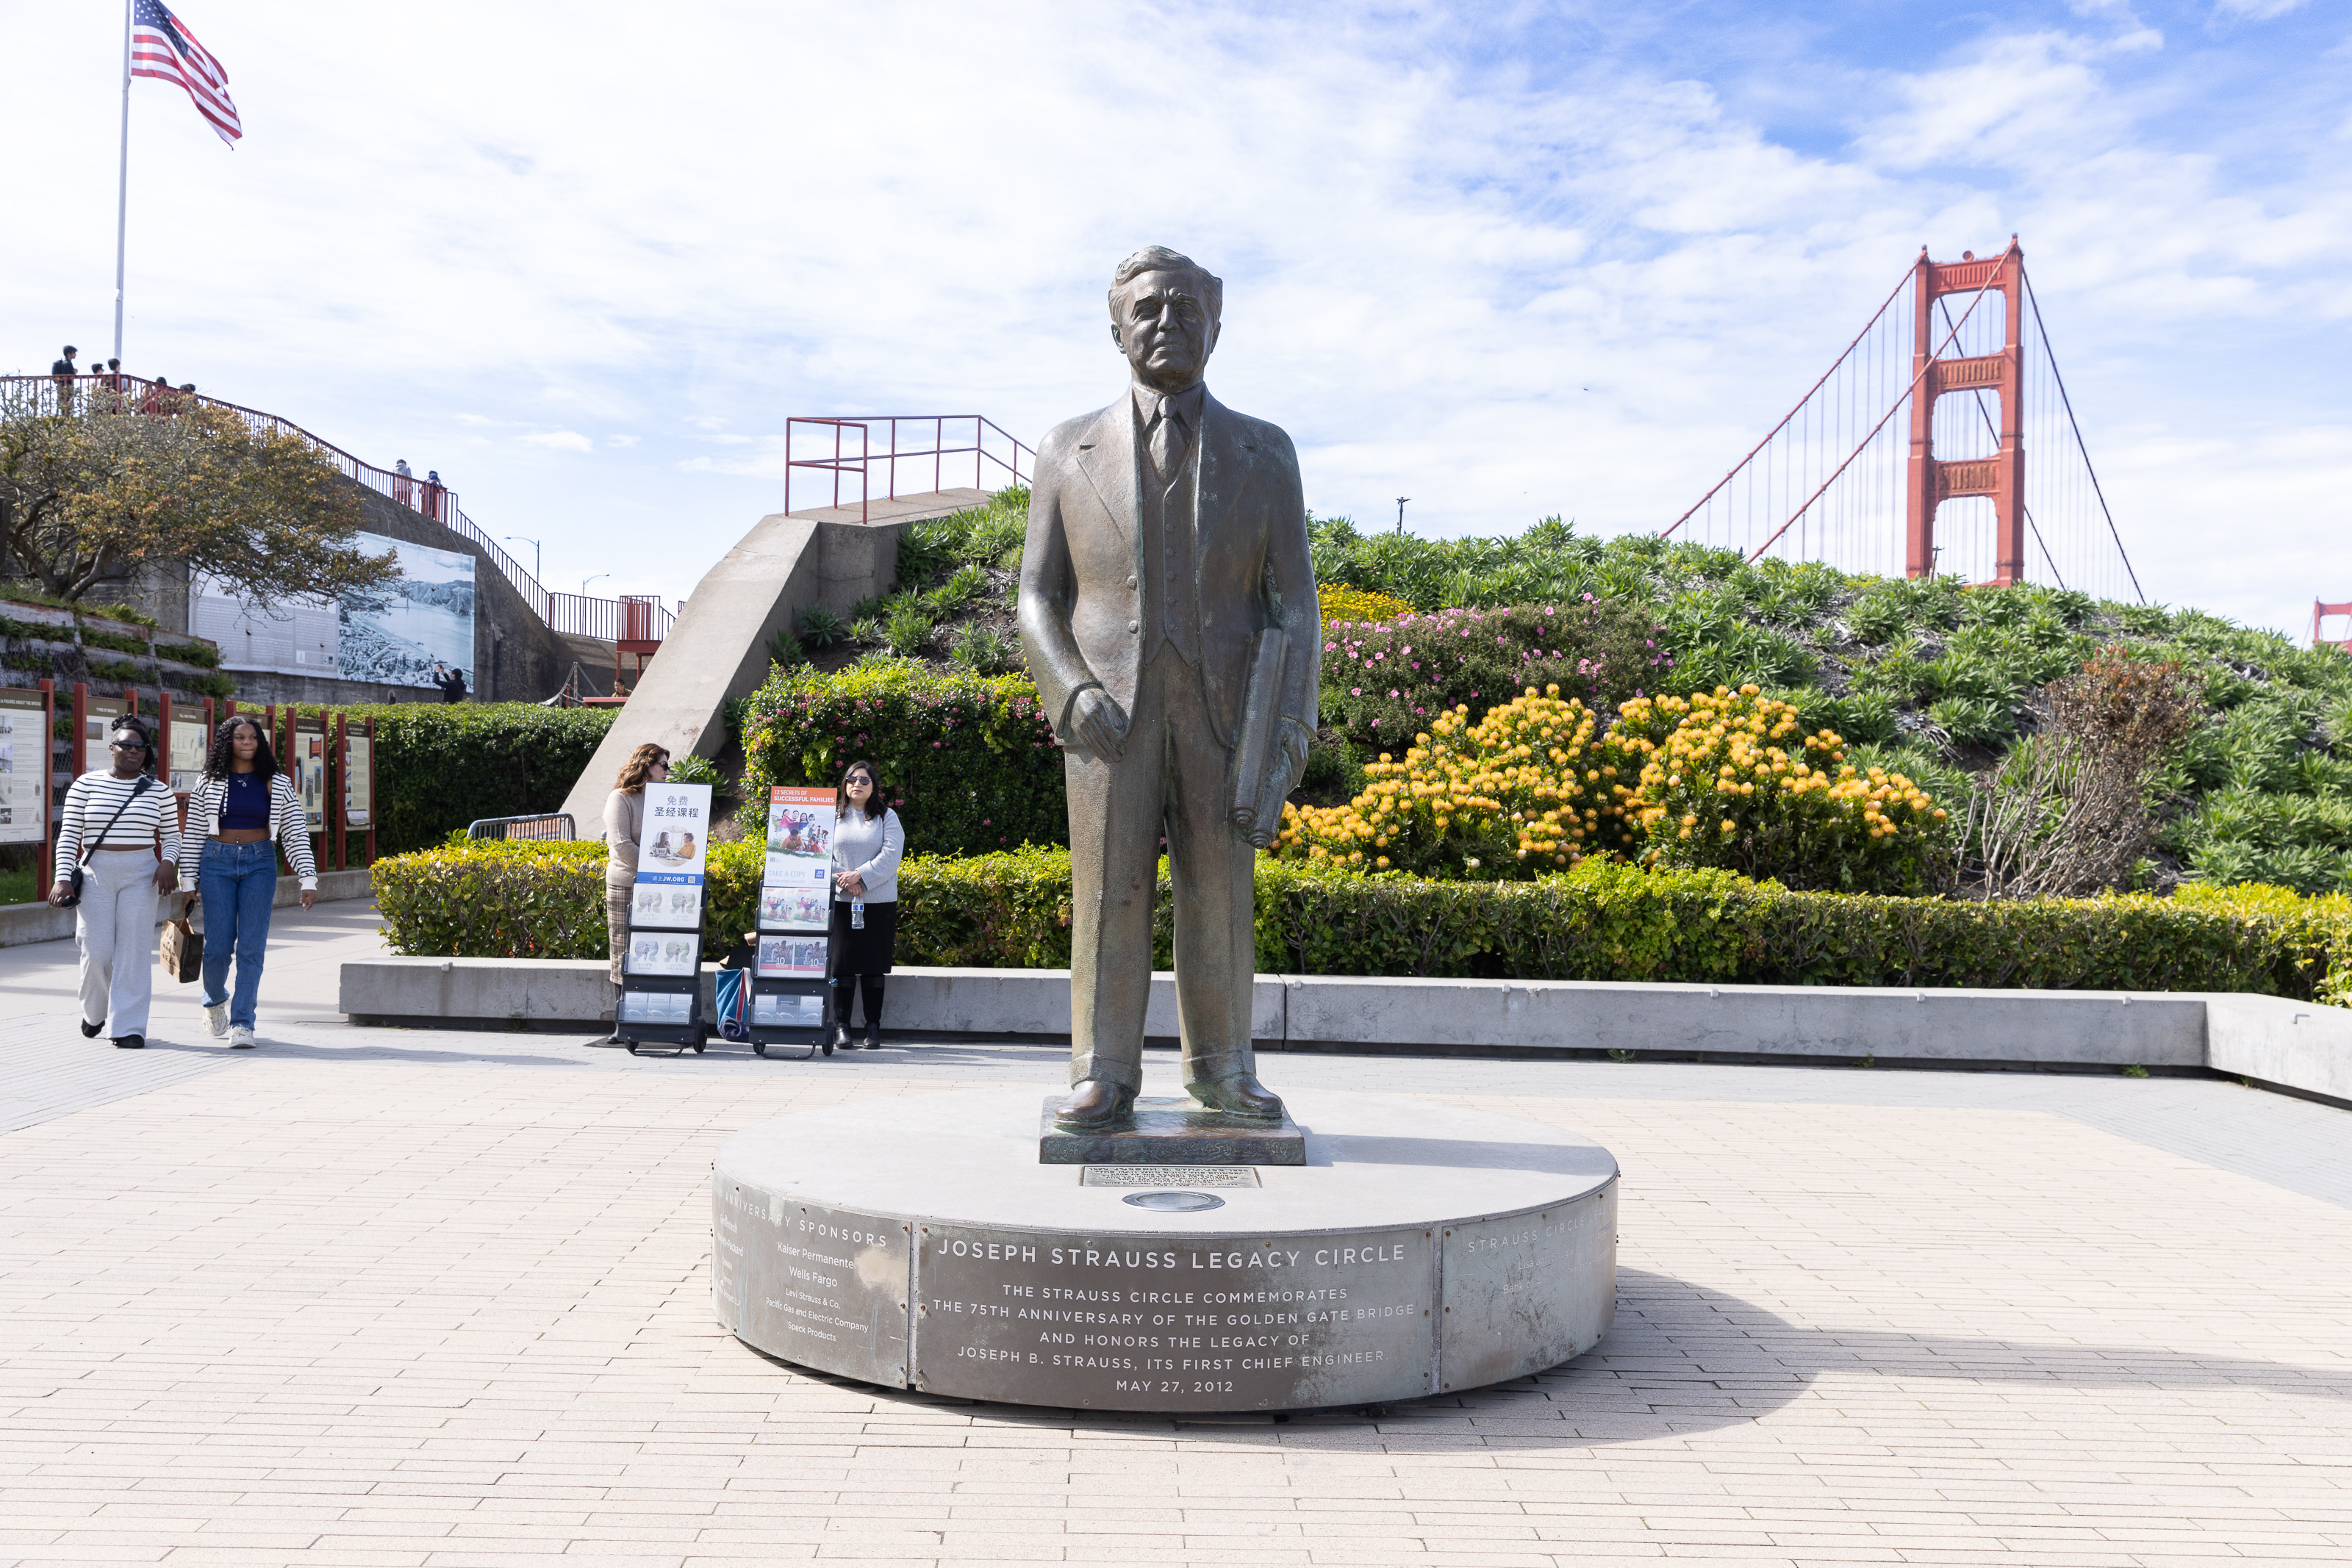 Statue of Joseph Strauss Legacy Circle at the Golden Gate Bridge Welcome Center and the Golden Gate Bridge in the background